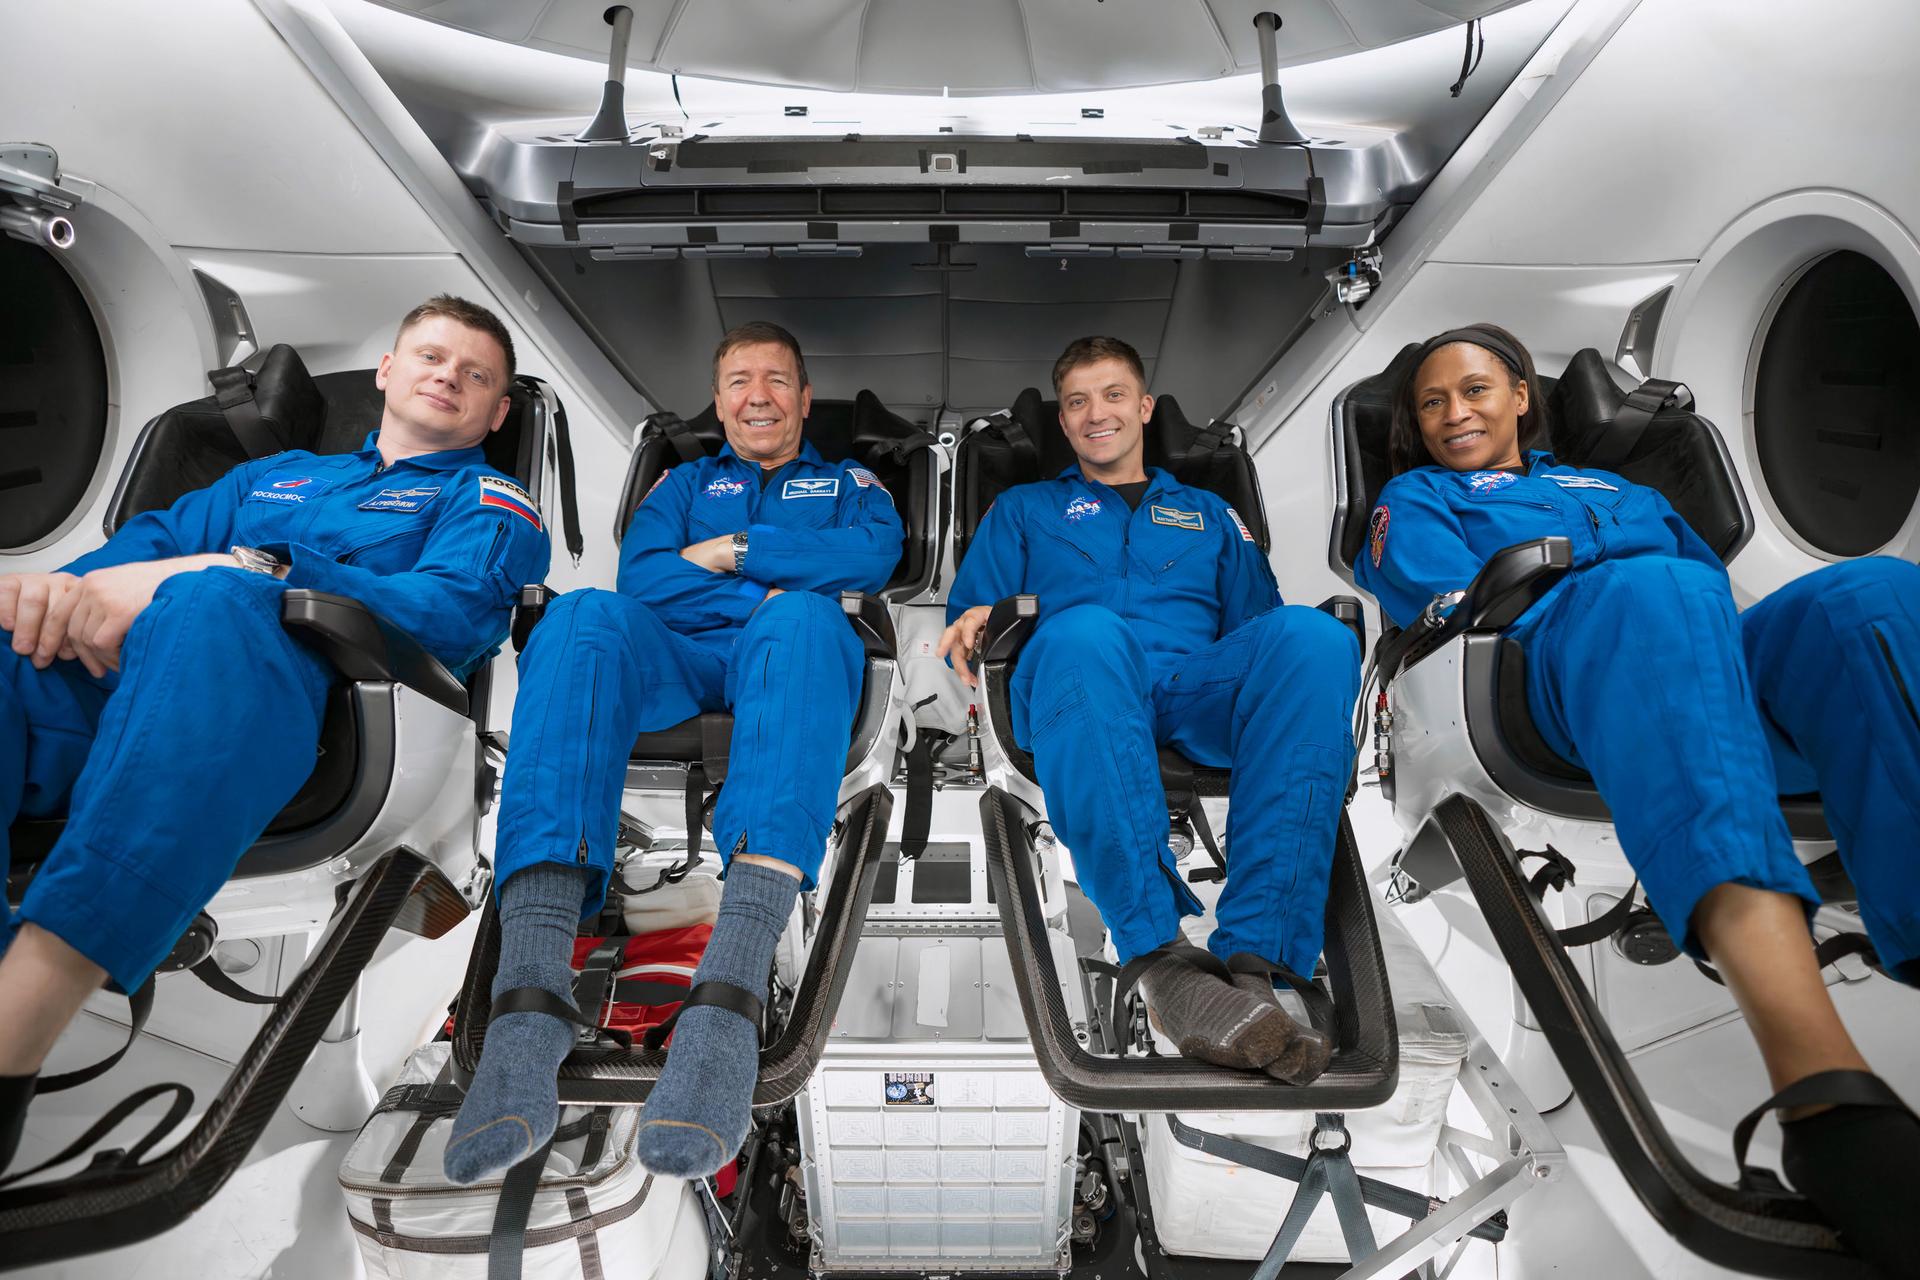 jsc2023e066245 (Oct. 15, 2023) --- The four SpaceX Crew-8 crew members (from left) Alexander Grebenkin from Roscosmos; Michael Barratt, Matthew Dominick, and Jeanette Epps, all NASA astronauts, are pictured training inside a Dragon mockup crew vehicle at SpaceX headquarters in Hawthorne, California.Four astronauts sit inside a SpaceX Dragon crew capsule.